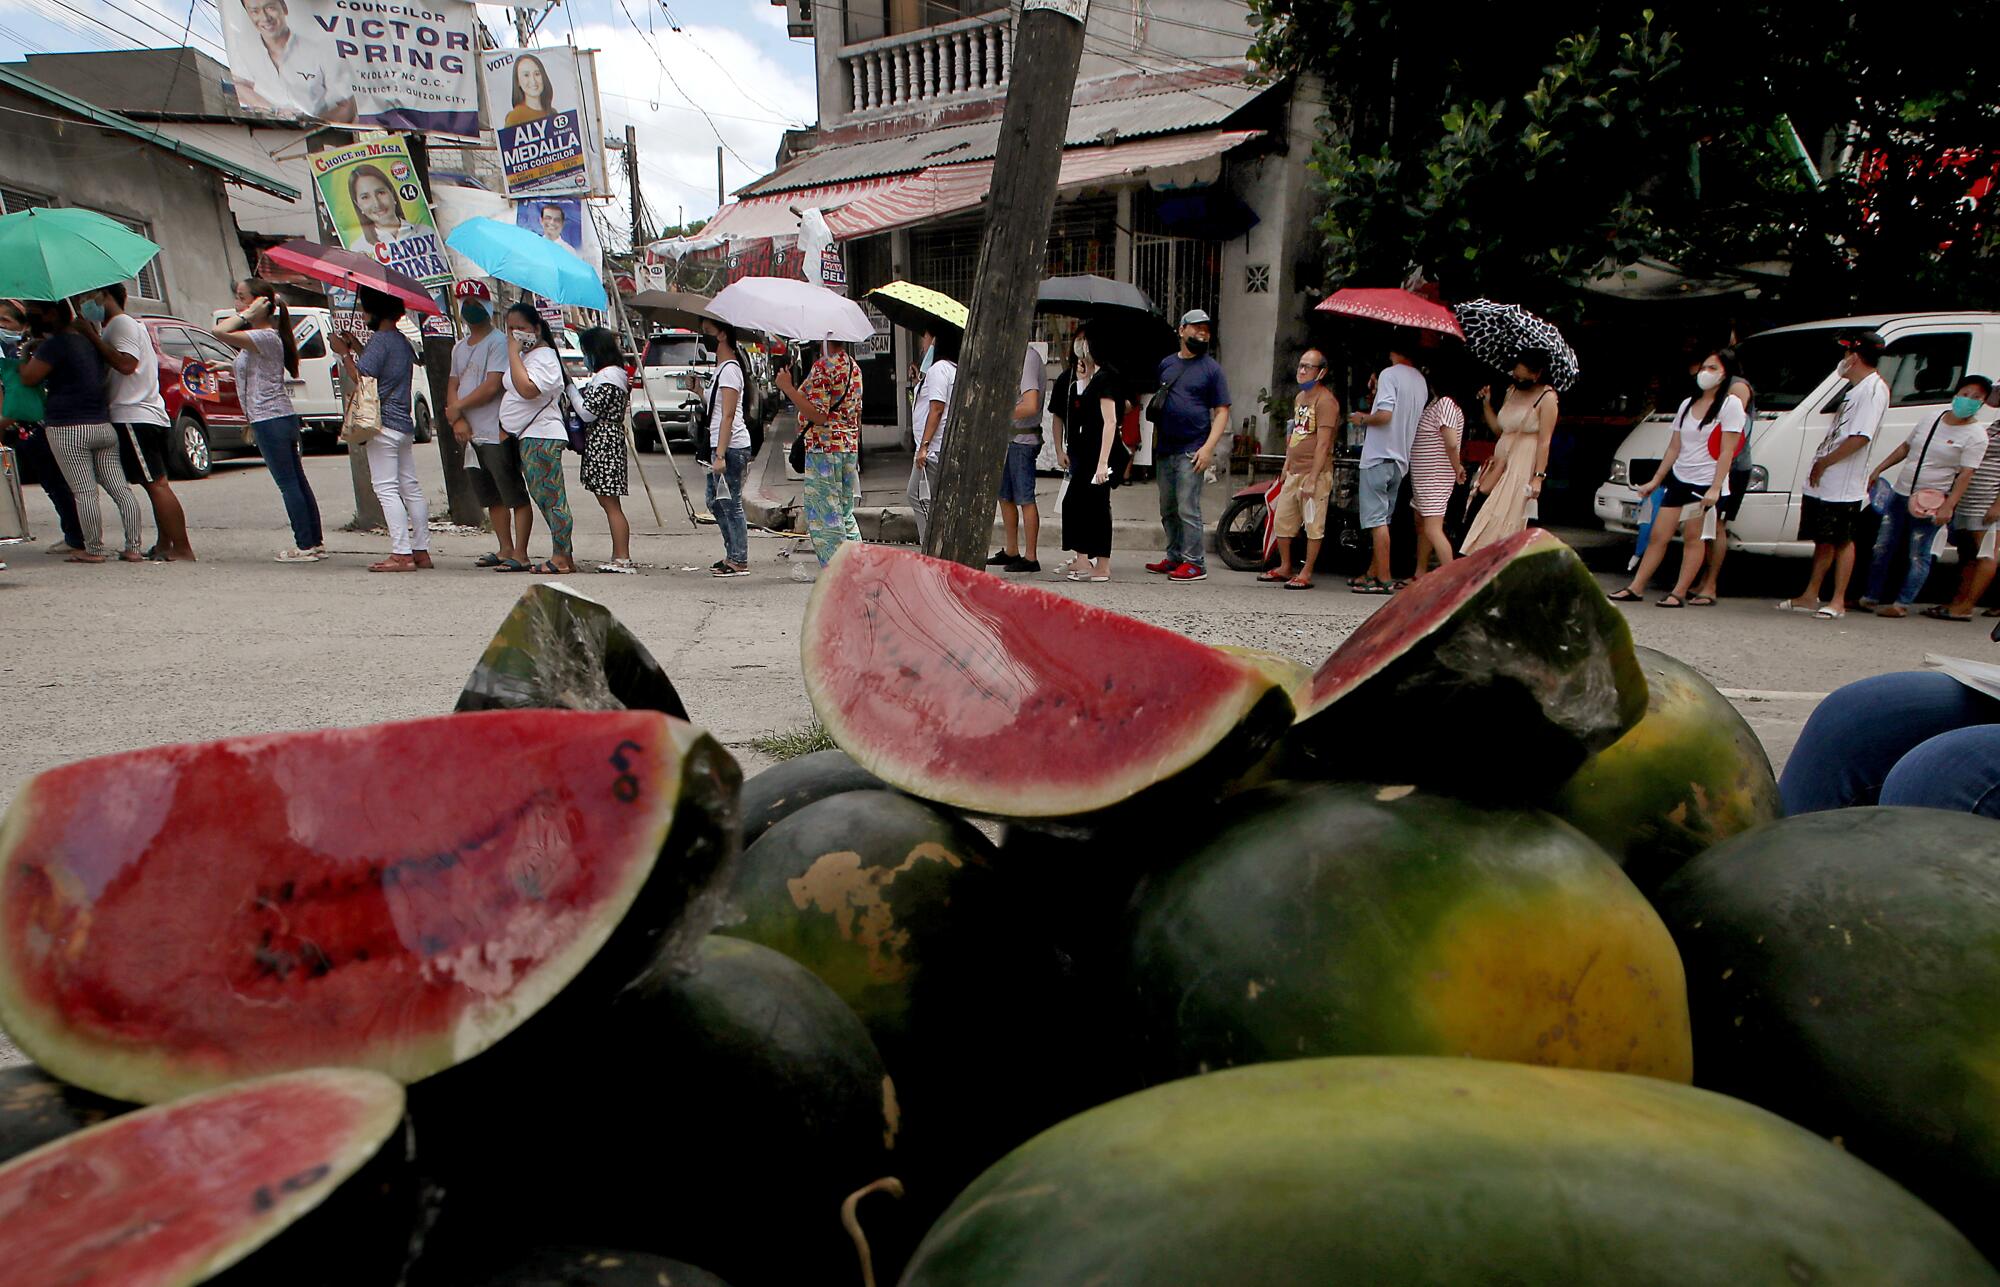 People lined up to vote, some holding umbrellas. In the foreground, watermelons for sale